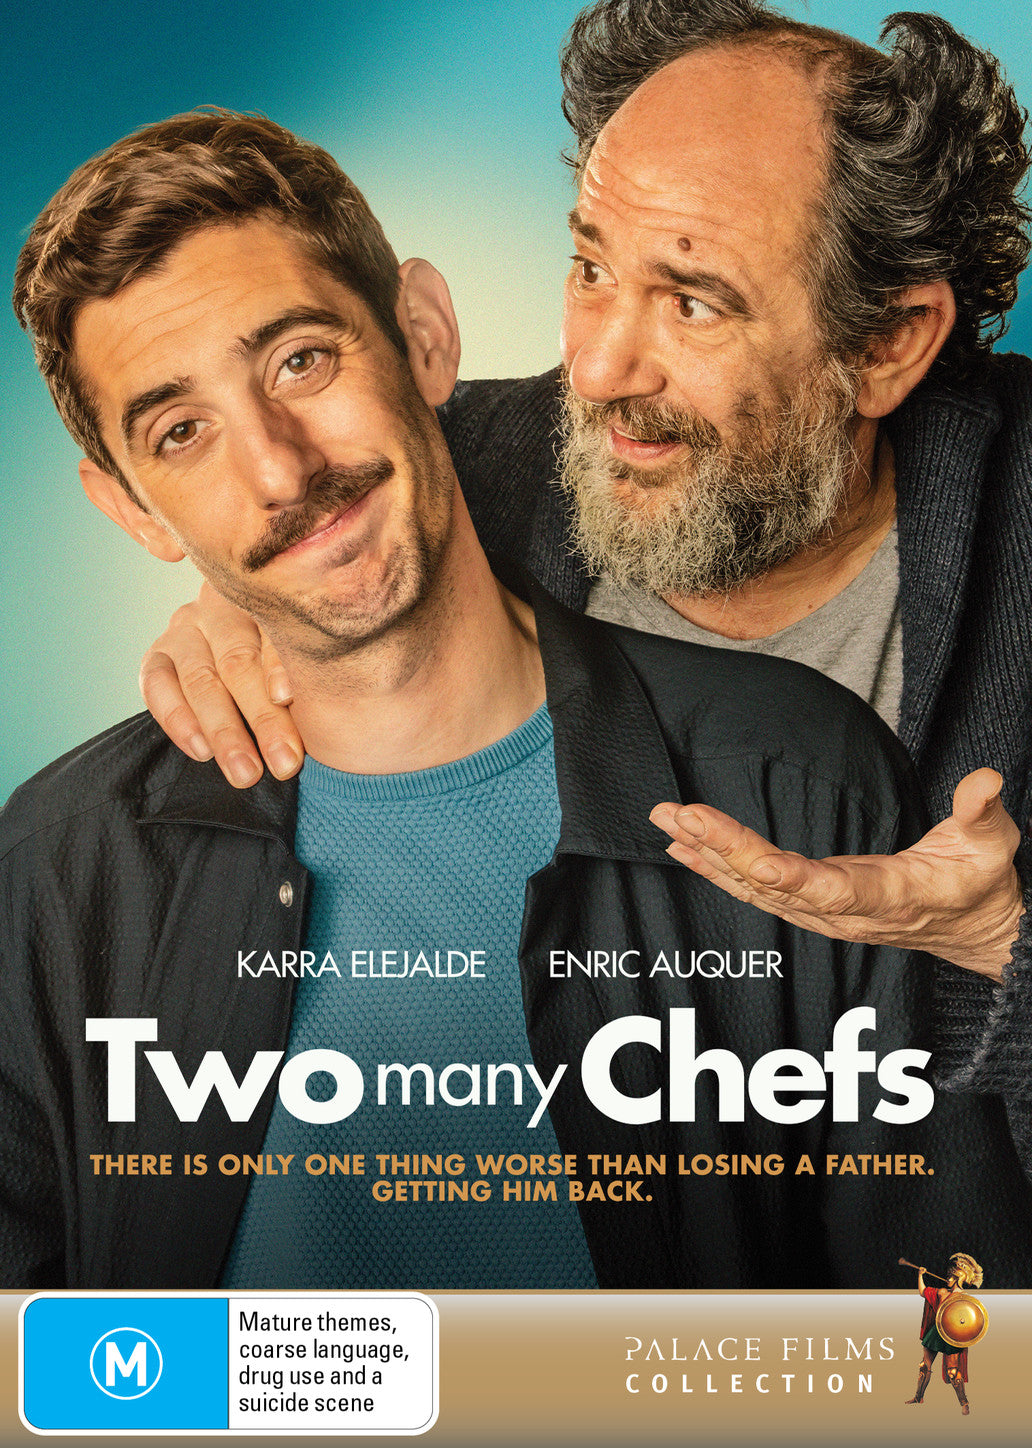 TWO MANY CHEFS